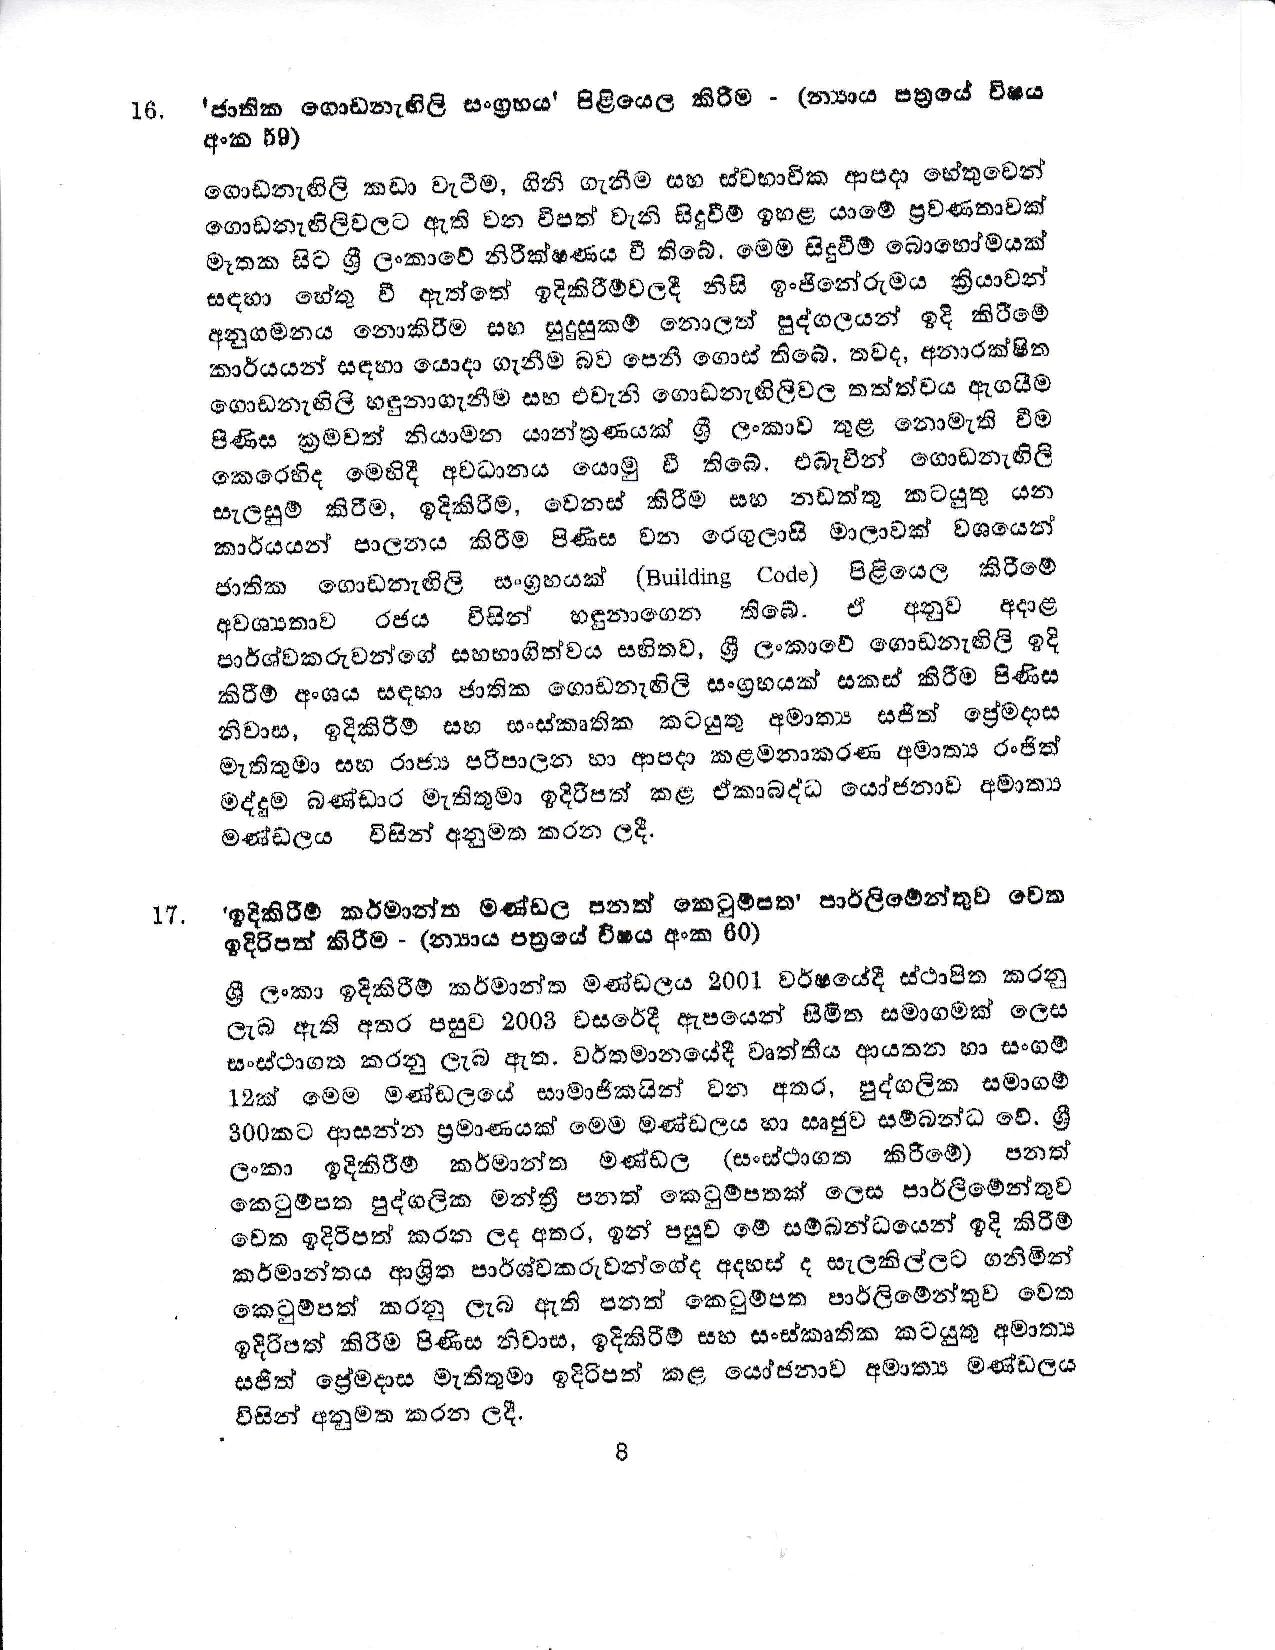 Cabinet Decision on 30.04.2019 page 008